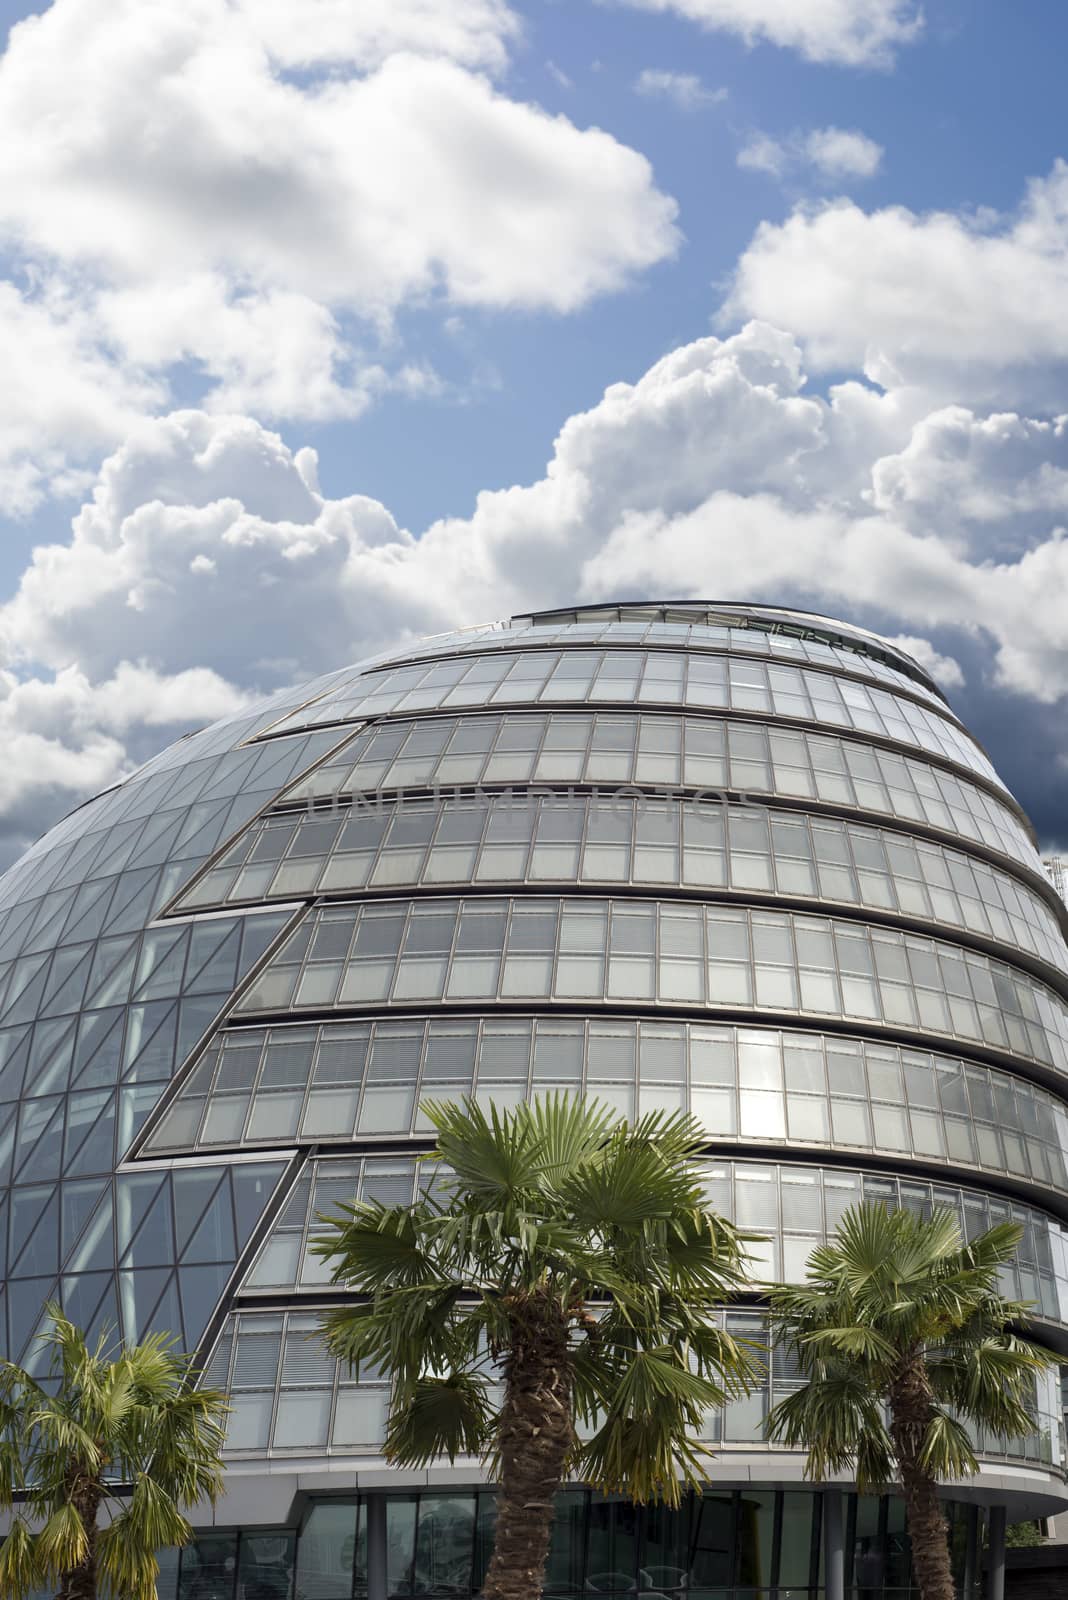 greater london council building by morrbyte